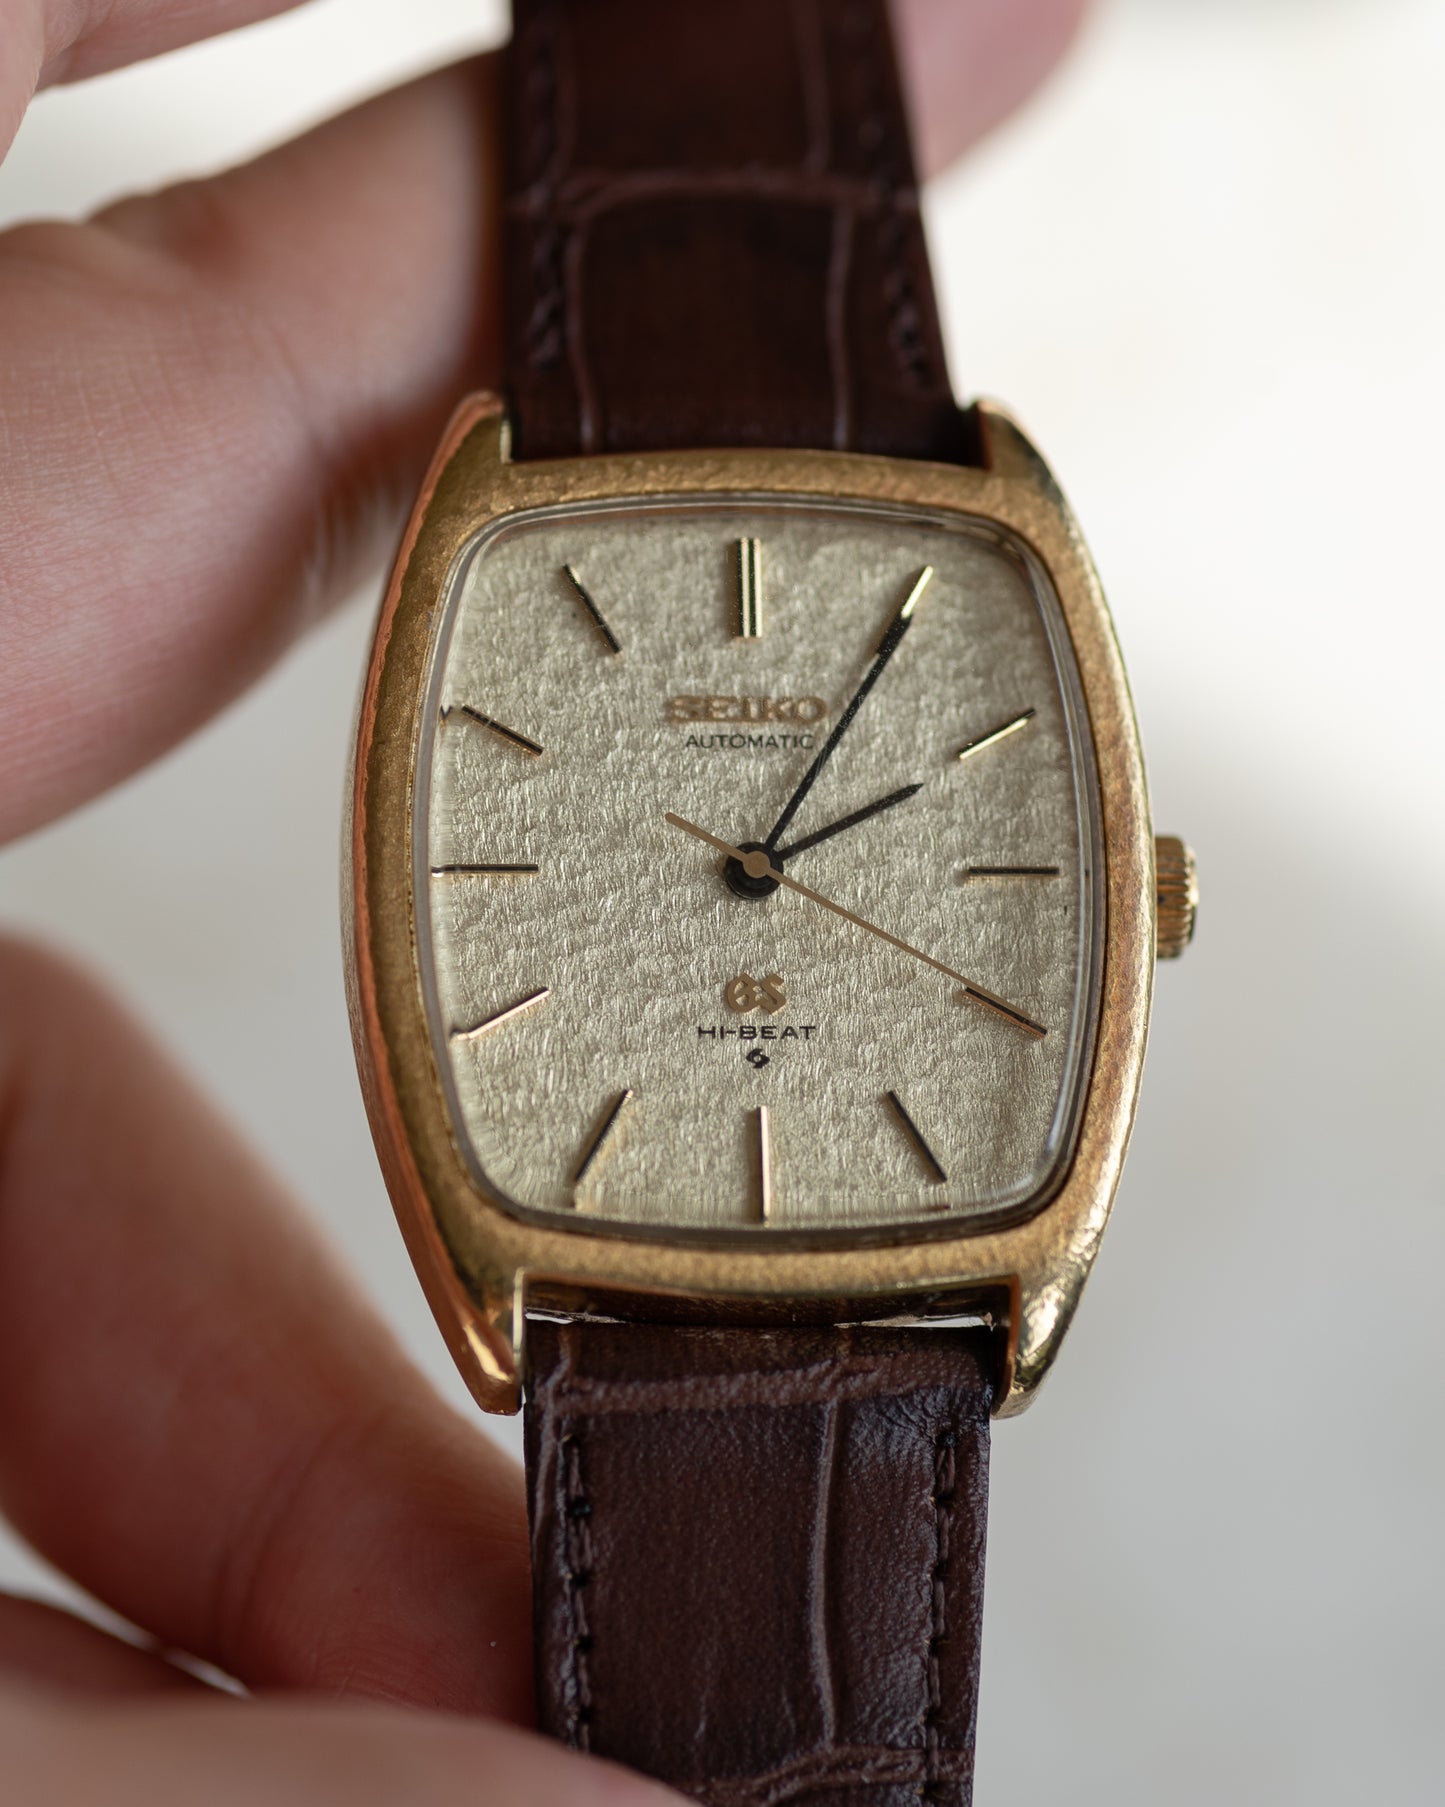 Grand Seiko 5641-5000 "snowflake" dial in 18k gold July 1971